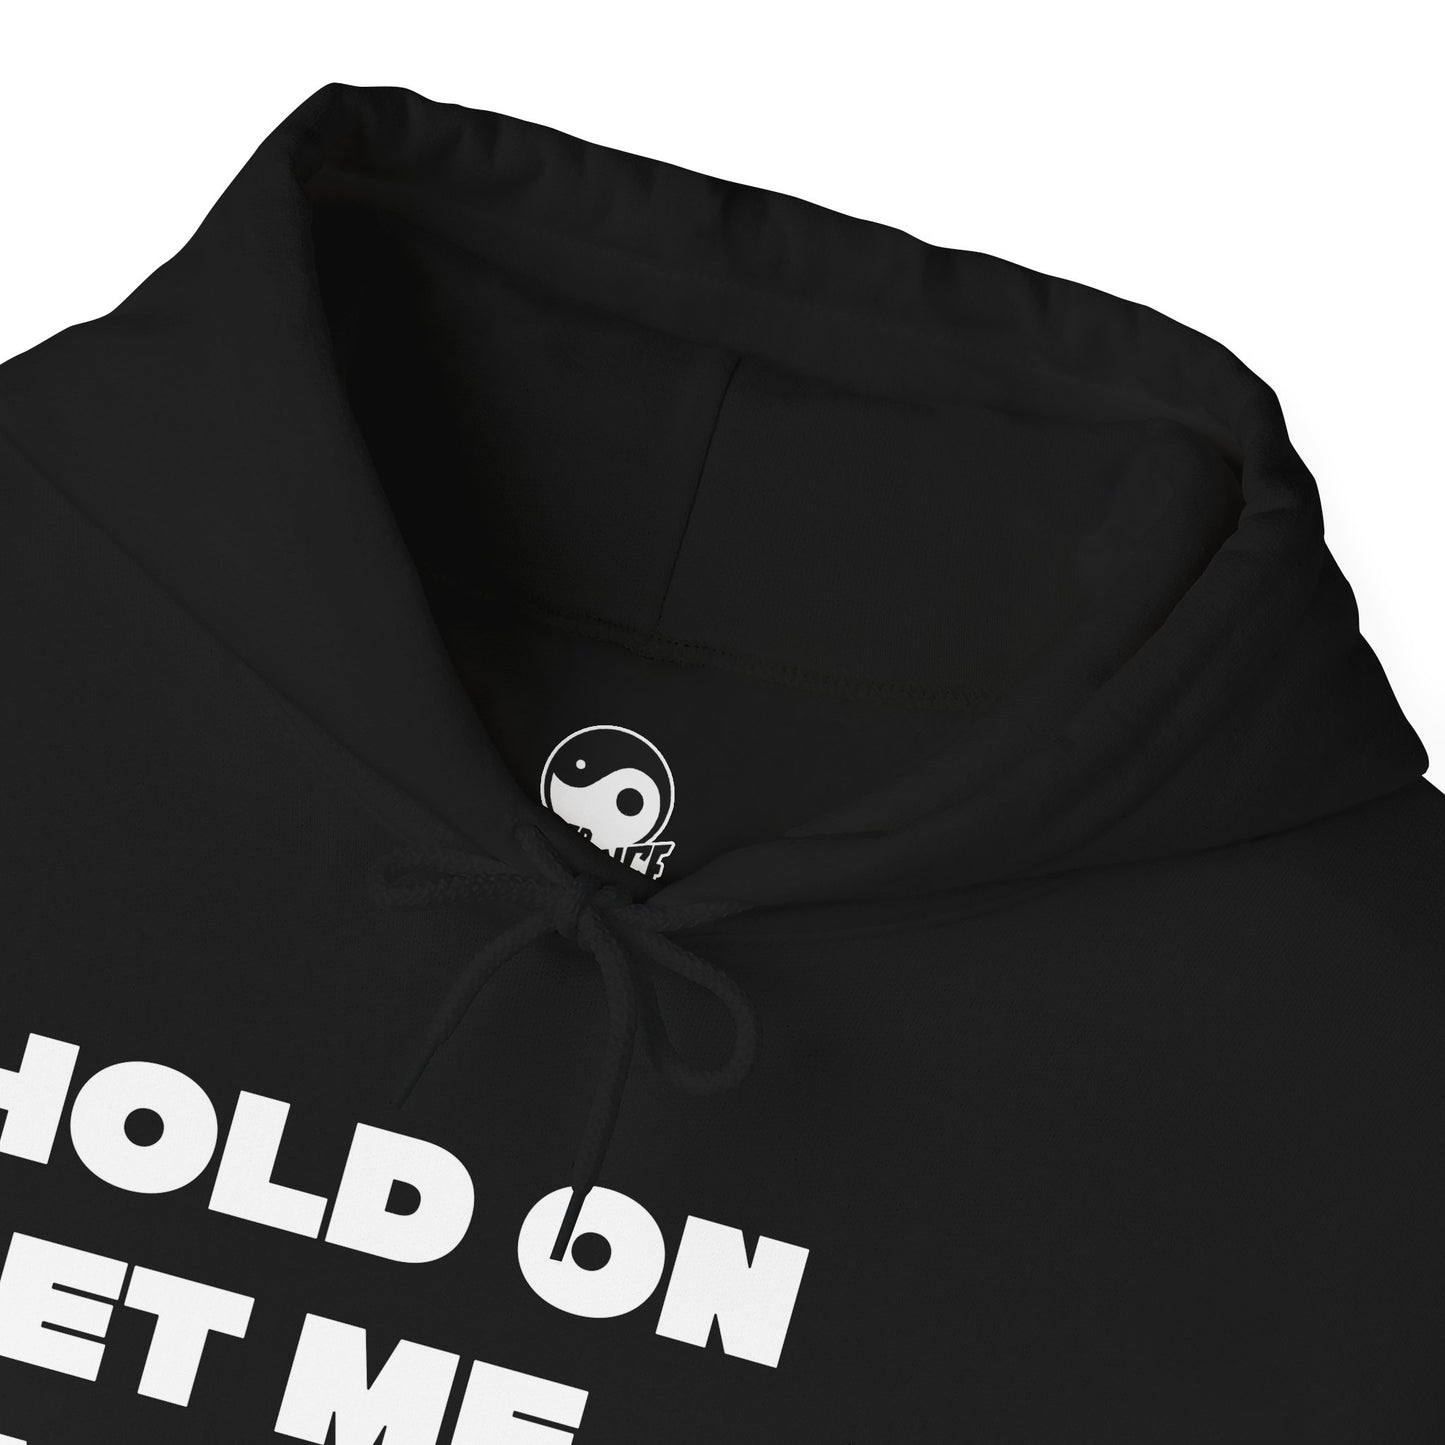 Hold On Let Me Overthink This. Unisex Hoodie